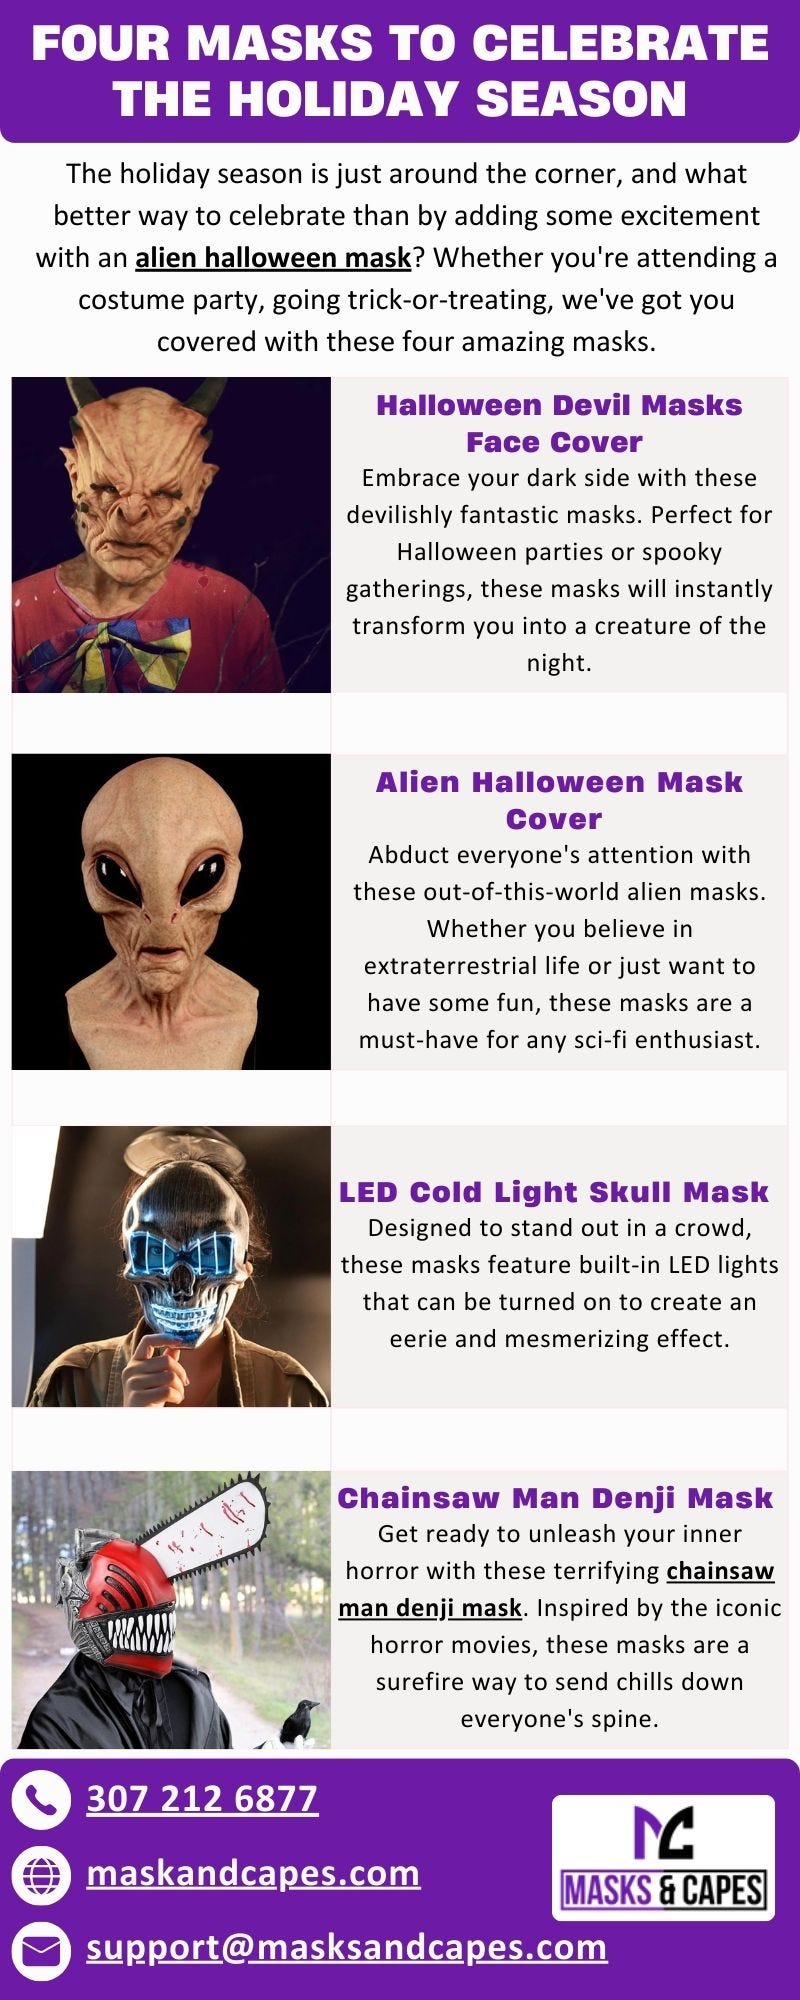 Four Masks To Celebrate The Holiday Season - Masks and Capes - Medium